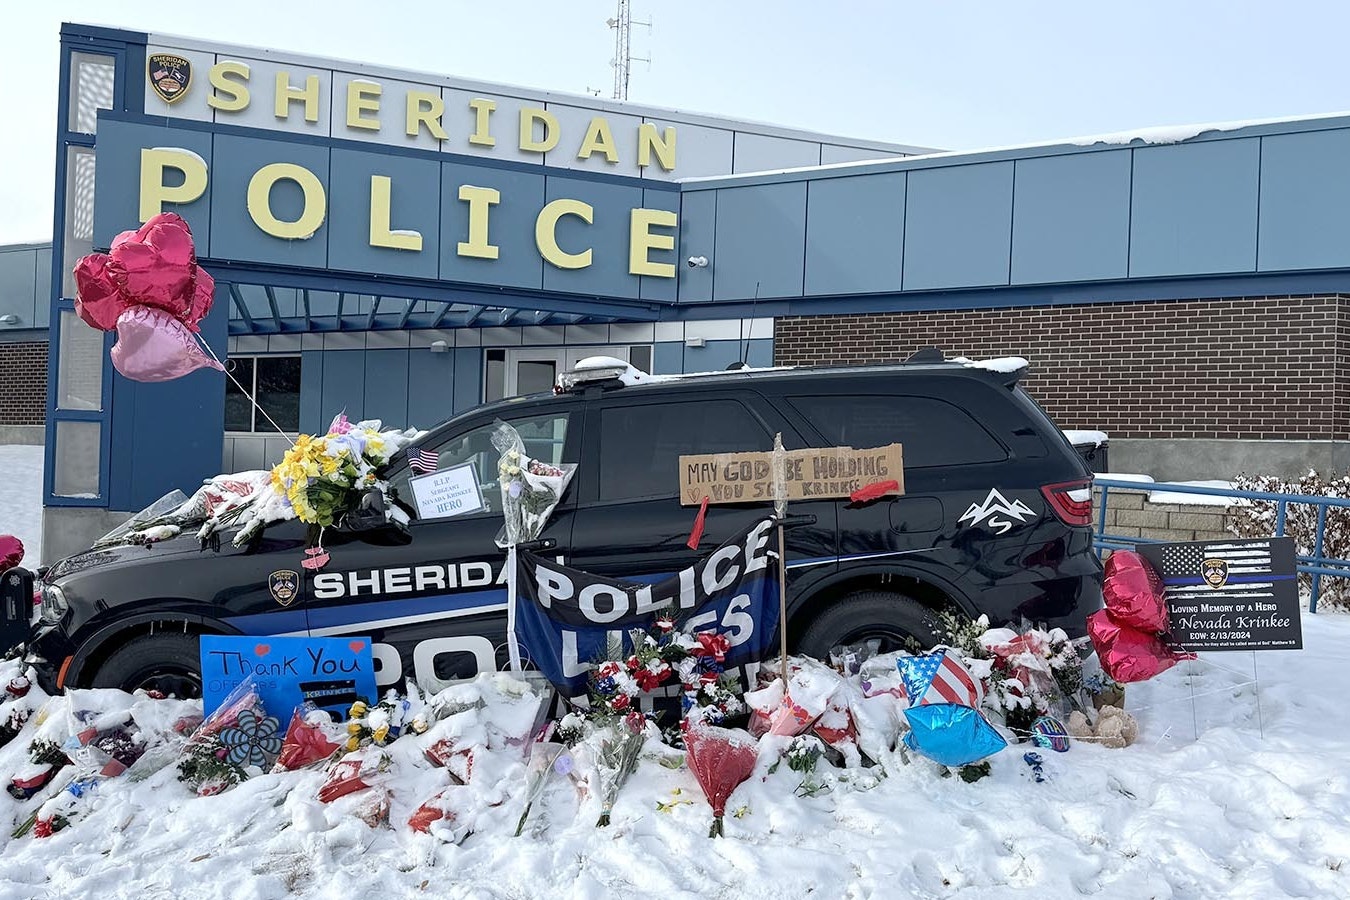 Sgt. Nevada Krinkee's police cruiser is parked in front of the Sheridan Police Department. People have been leaving memorials and messages to the officer who was killed in the line of duty Tuesday.